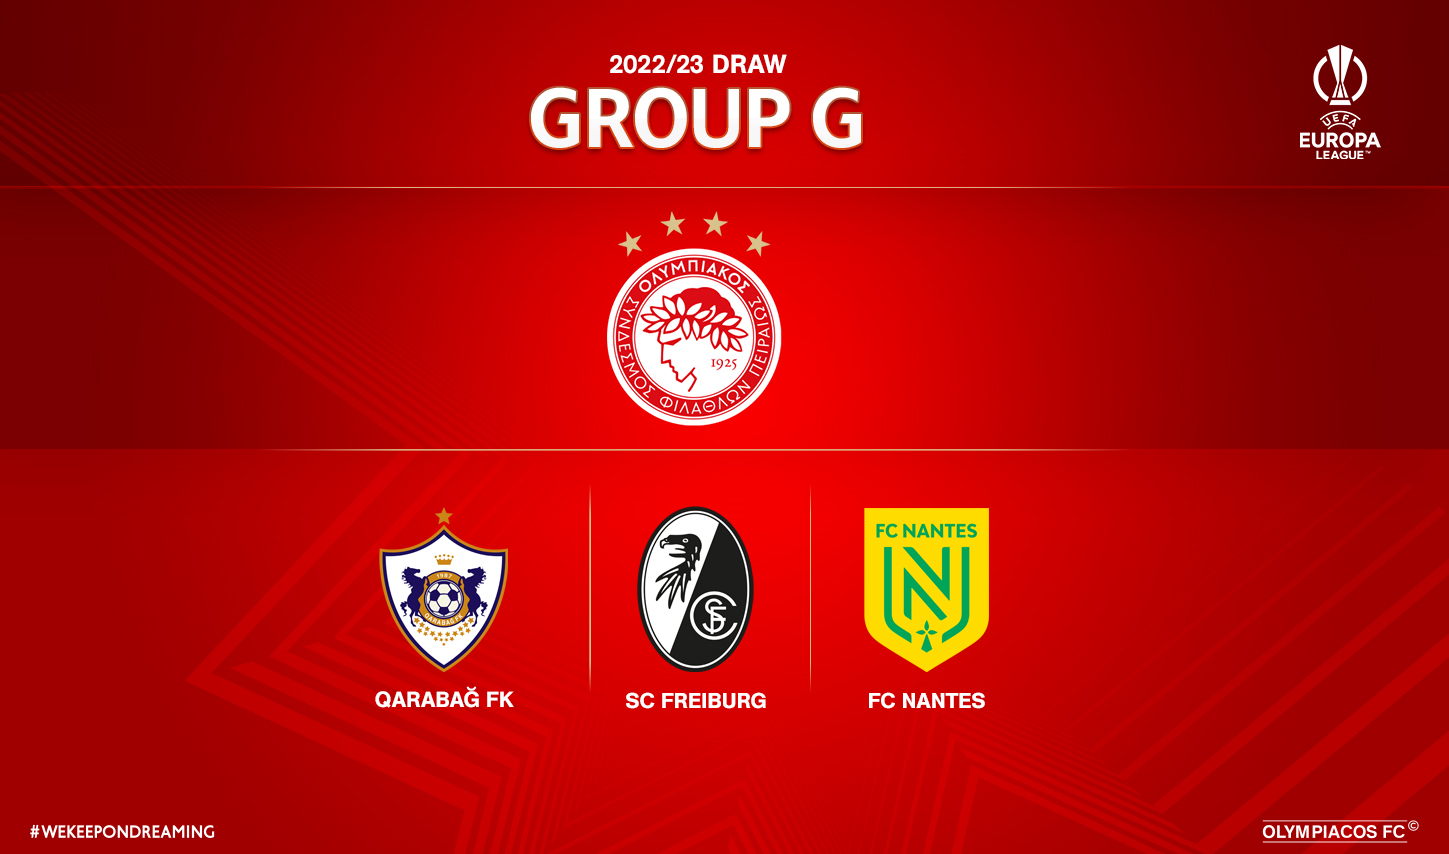 Clubs drawn to play Olympiacos in the Europa League group stage